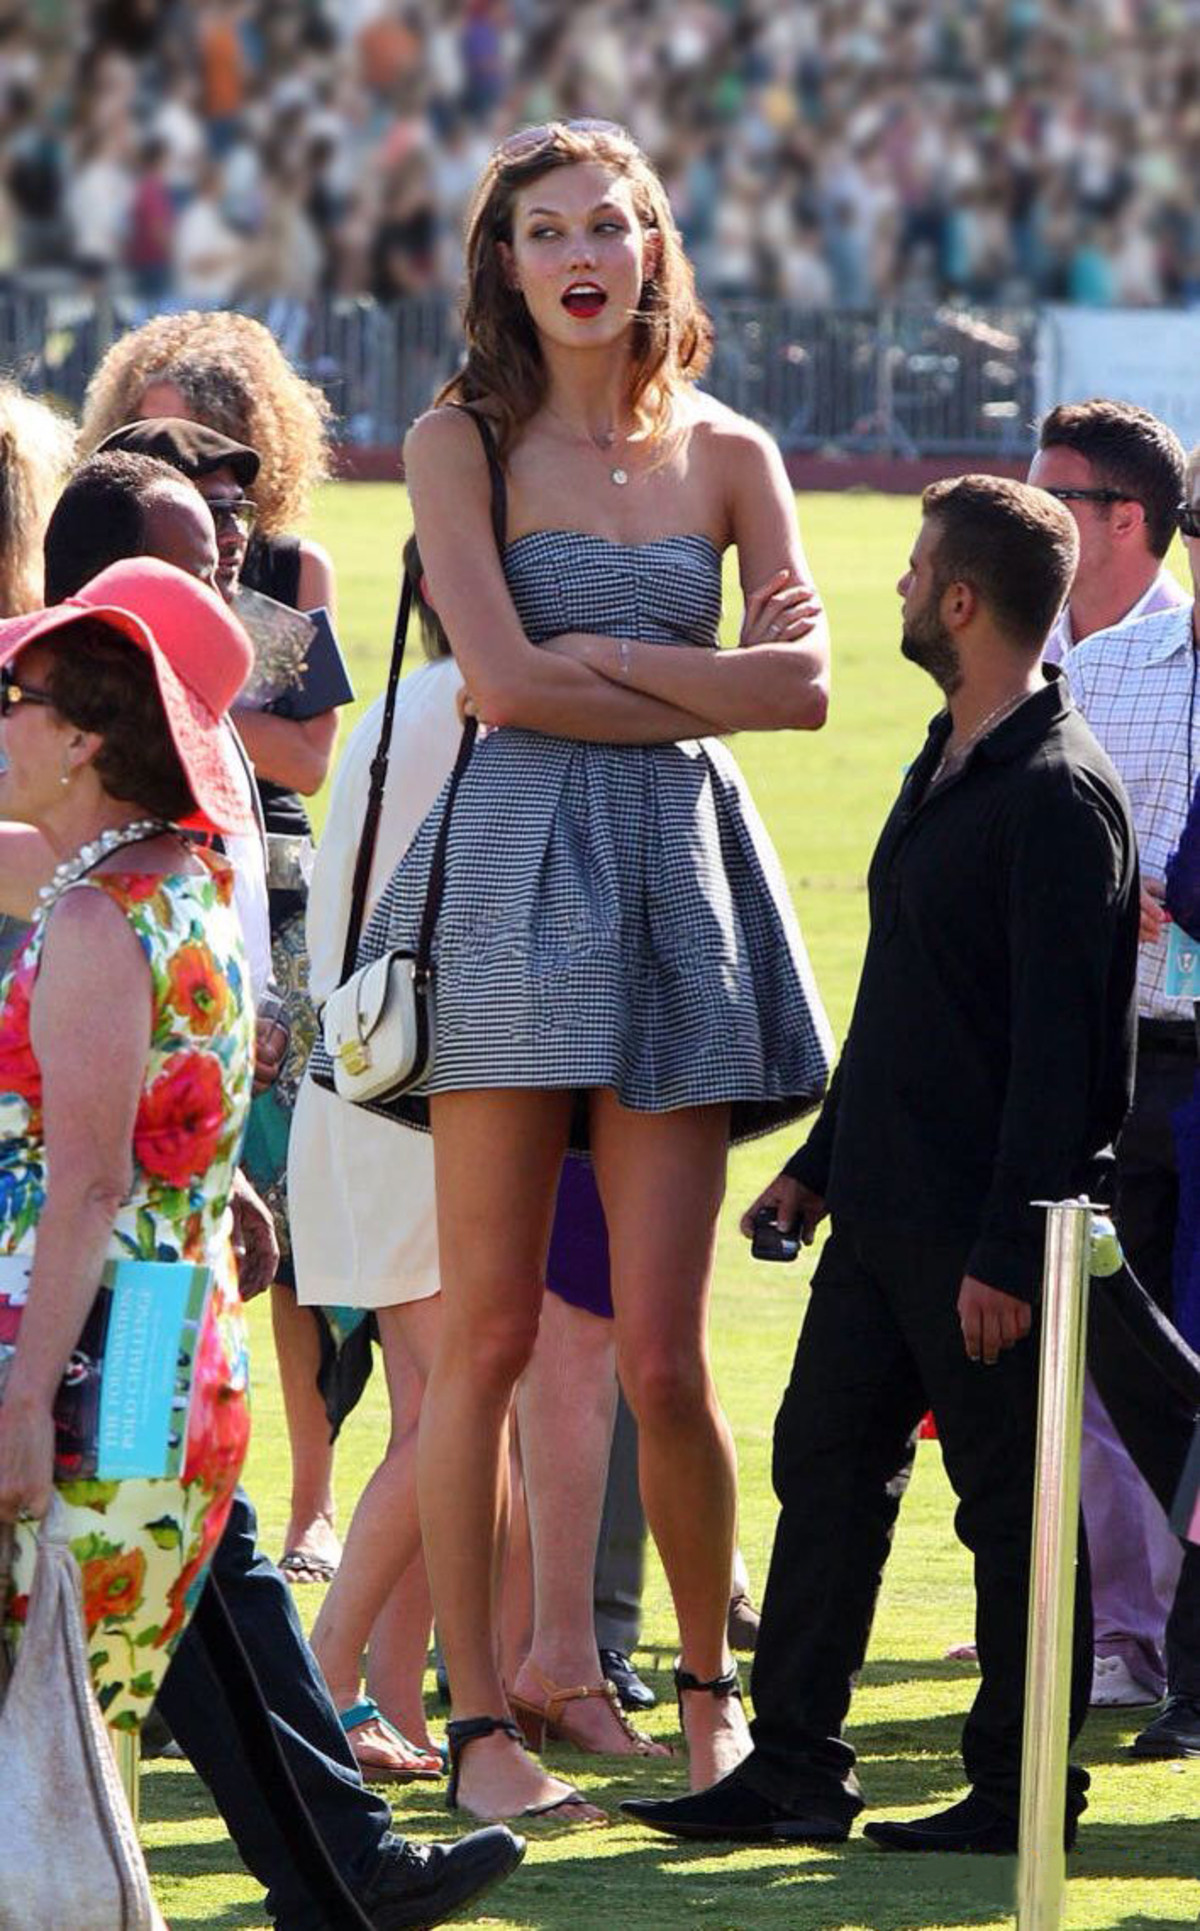 Tall girl Karlie Kloss. .. There’s really not much to say here.